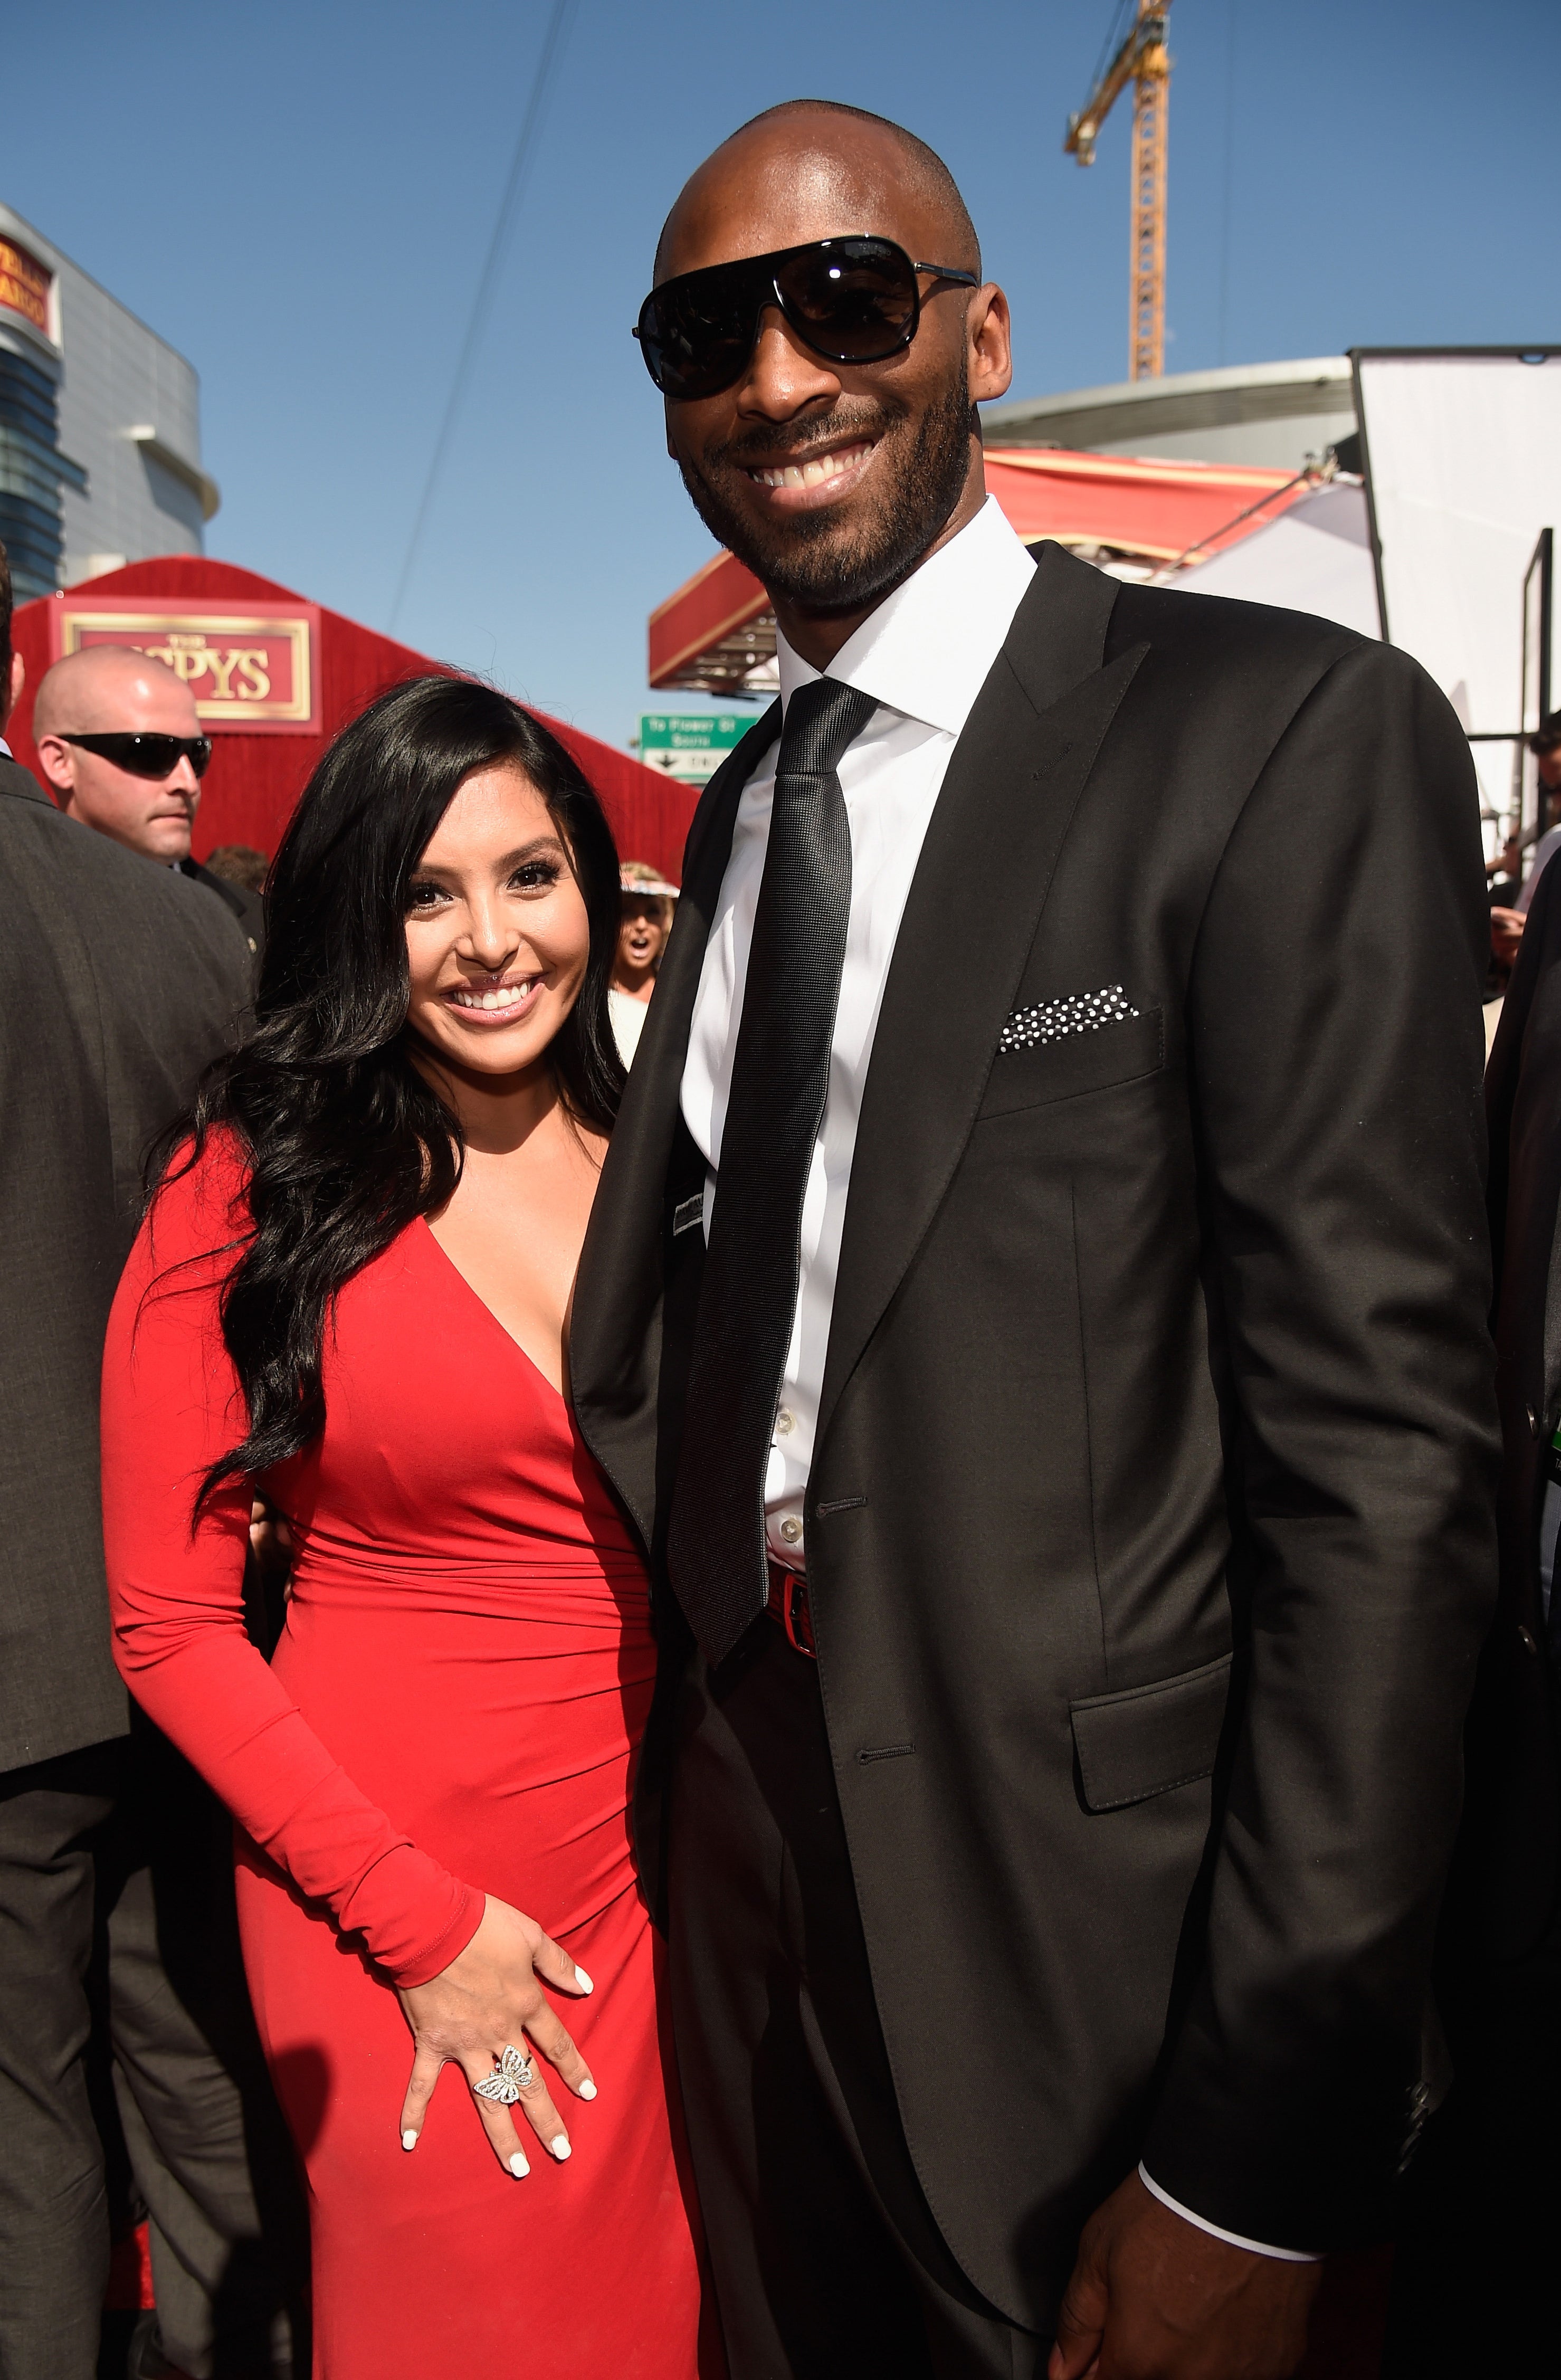 THE 2016 ESPYS Red Carpet Brought out the Real Fashion MVPs
